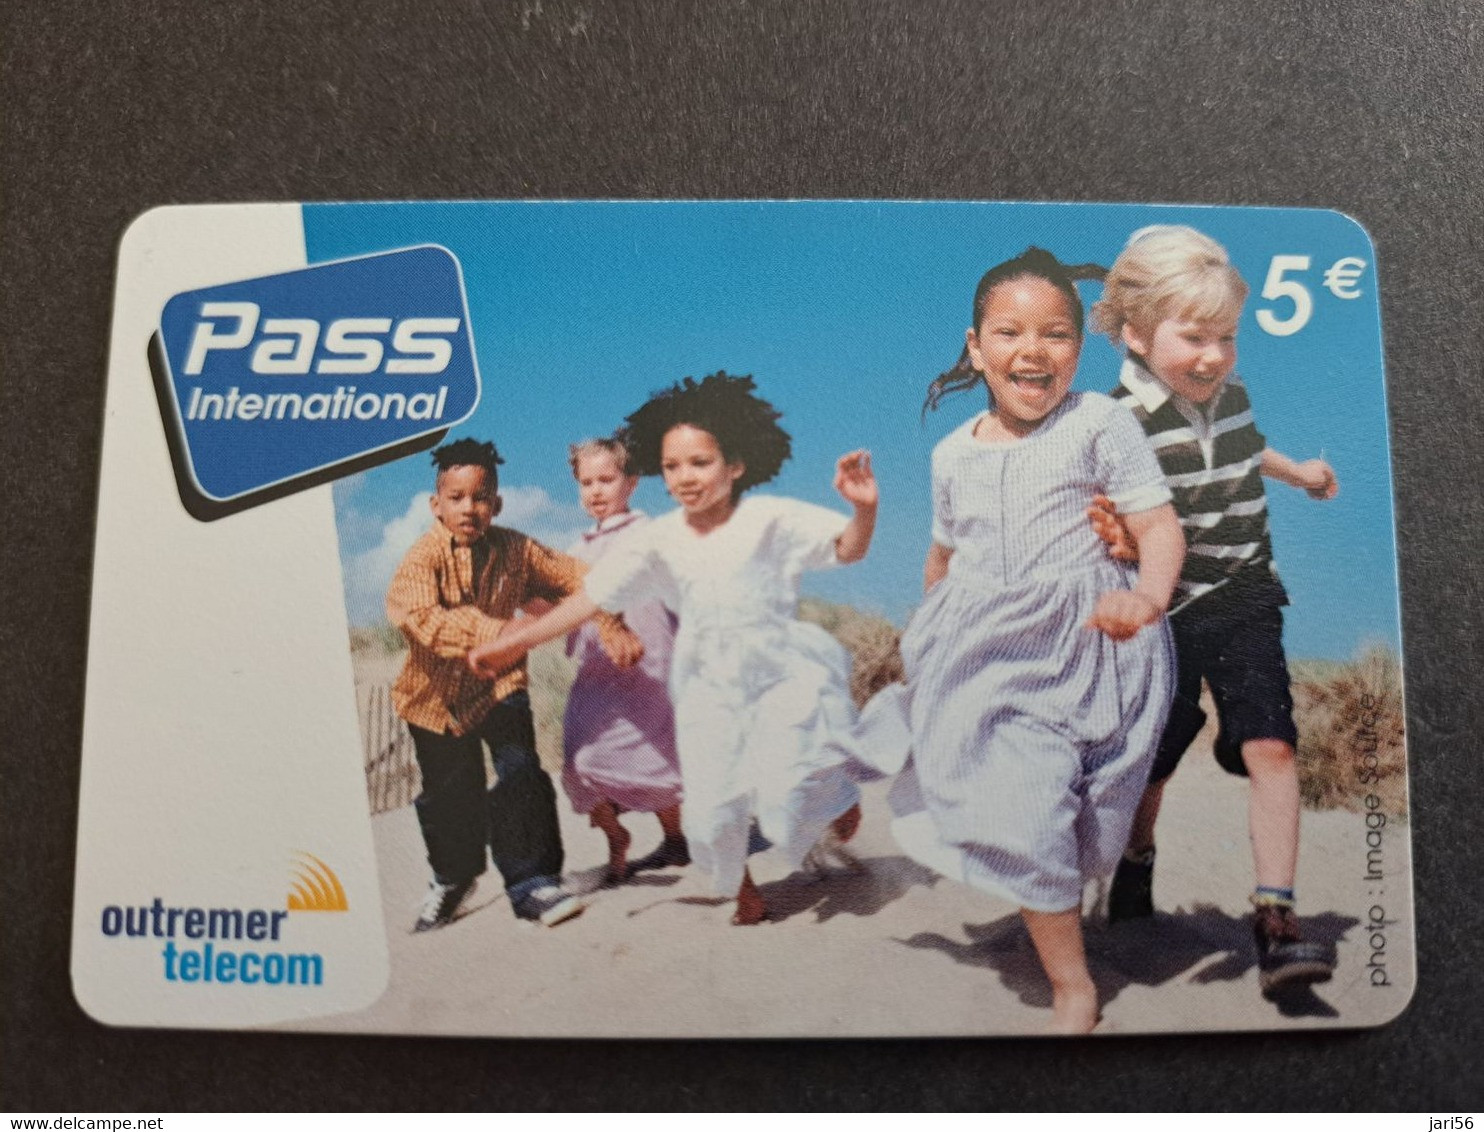 Phonecard St Martin French OUTREMER TELECOM   PASS Telecom  PLAYING CHILDREN  5 EURO  ** 10508 ** - Antilles (French)